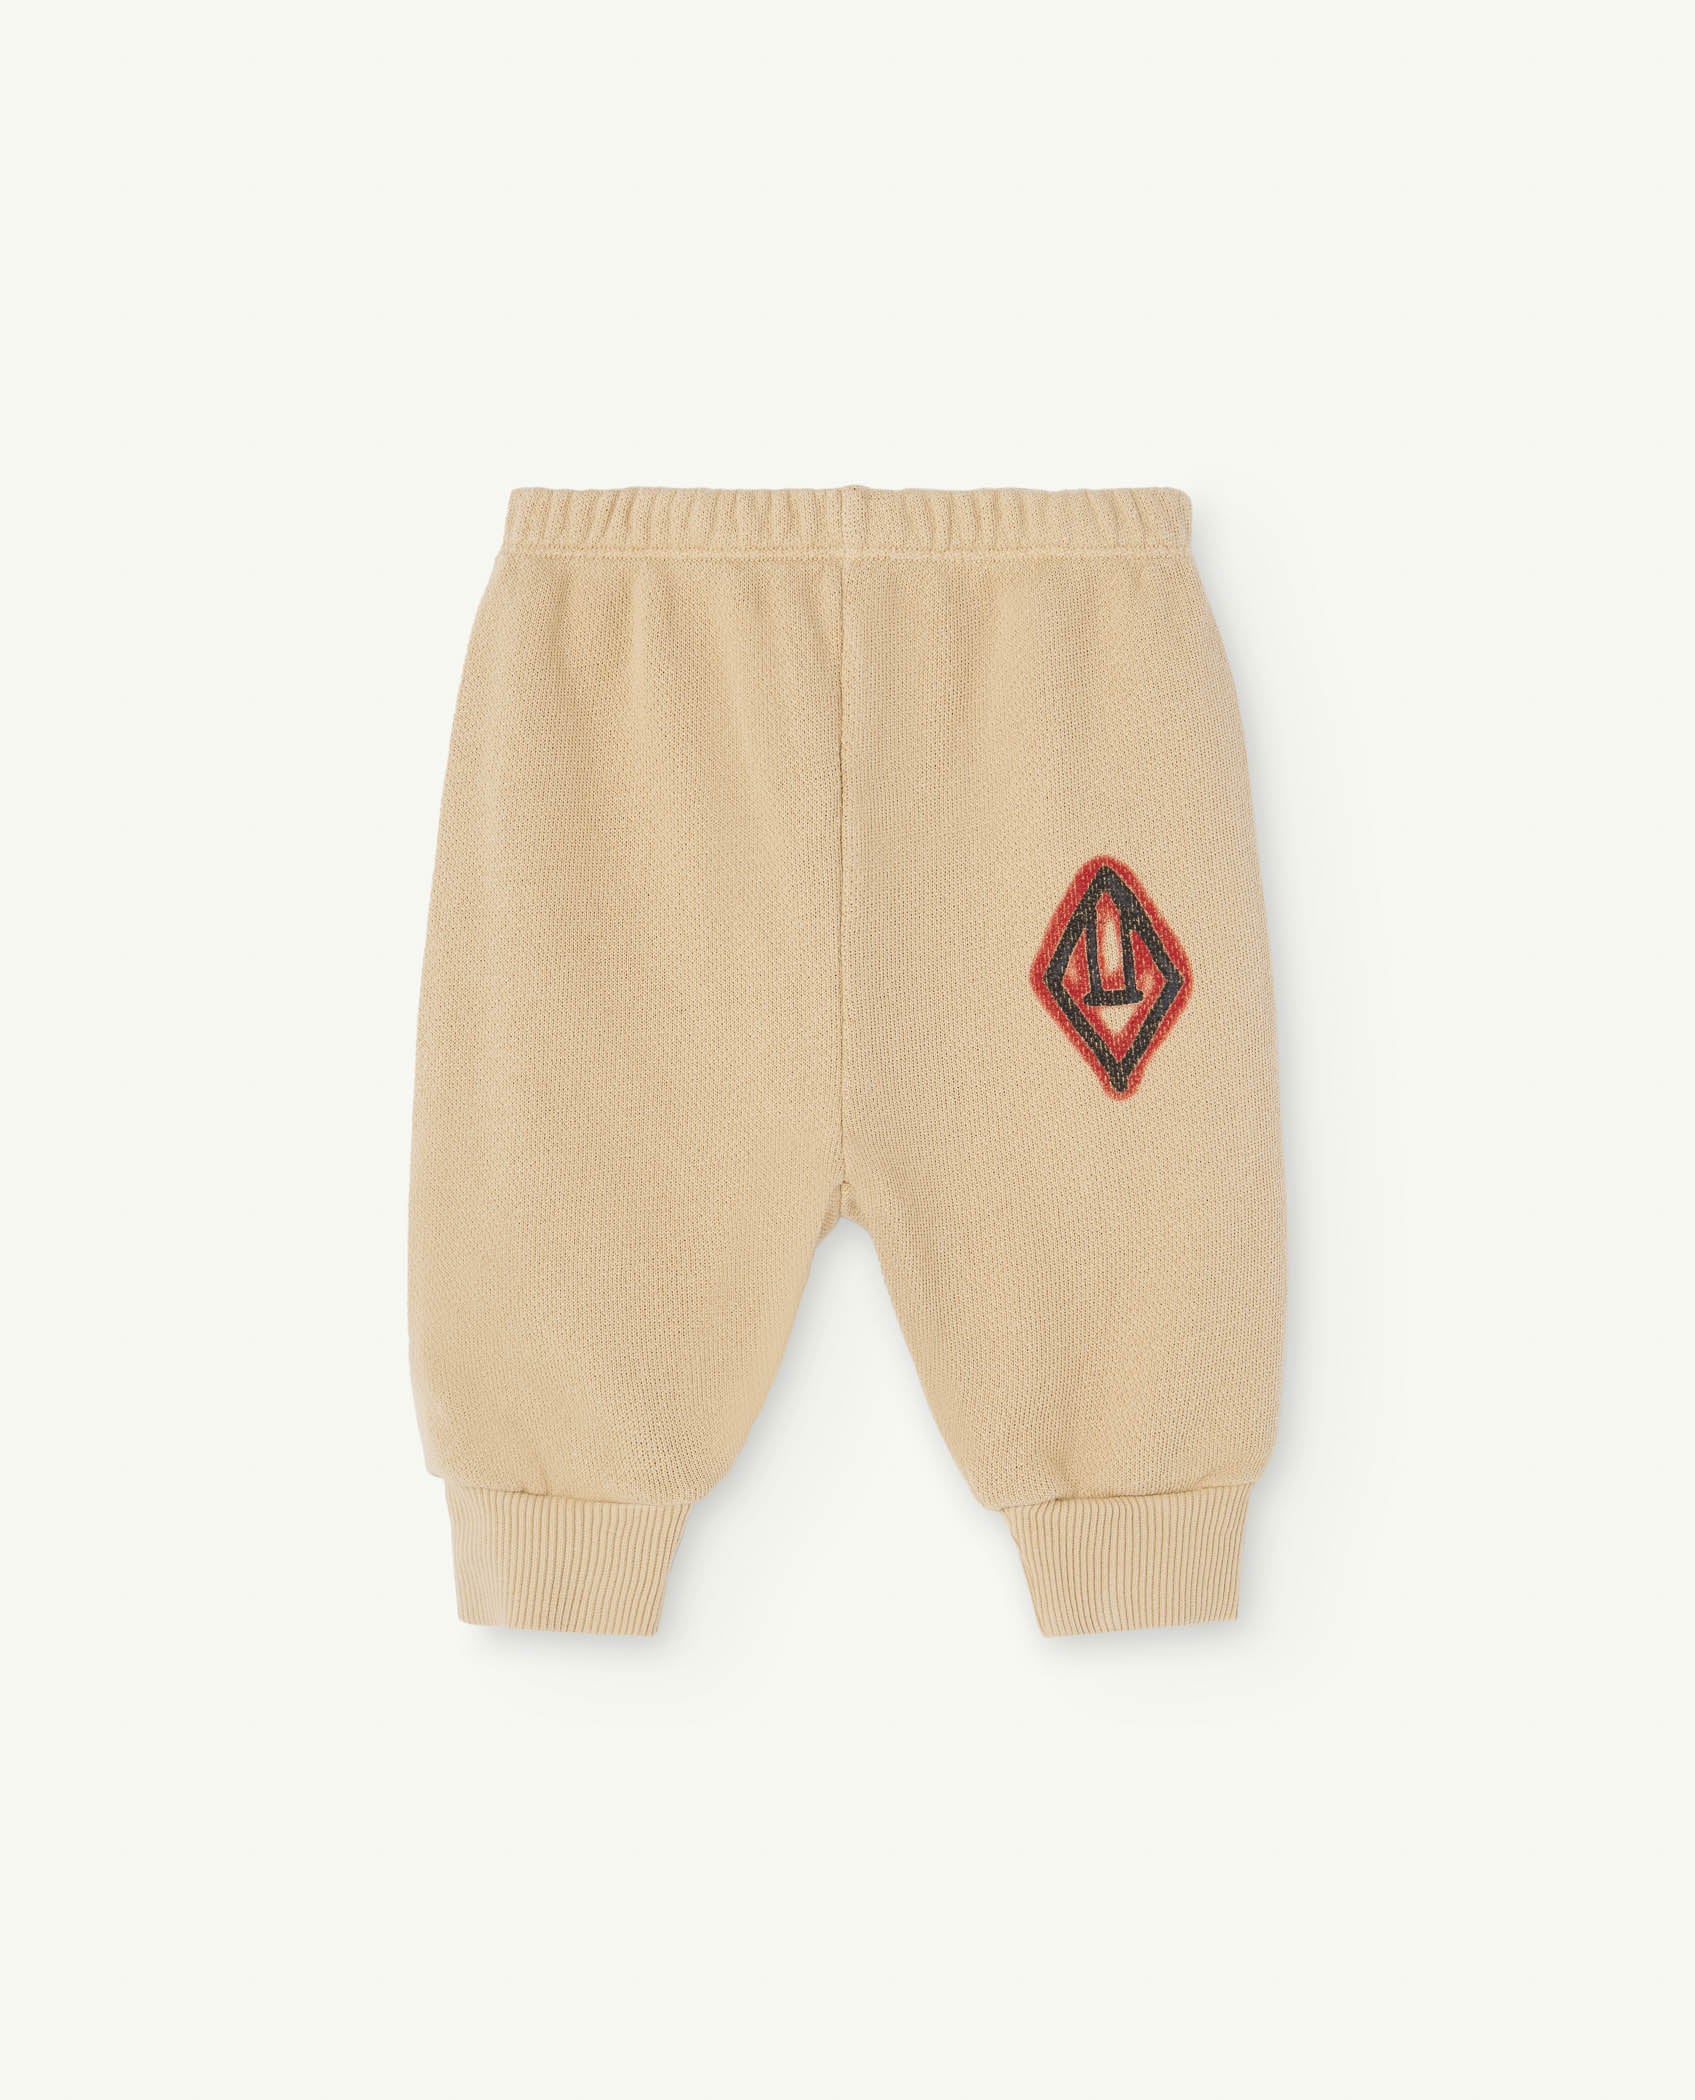 The animals Observatory - Dromedary baby pant - beige